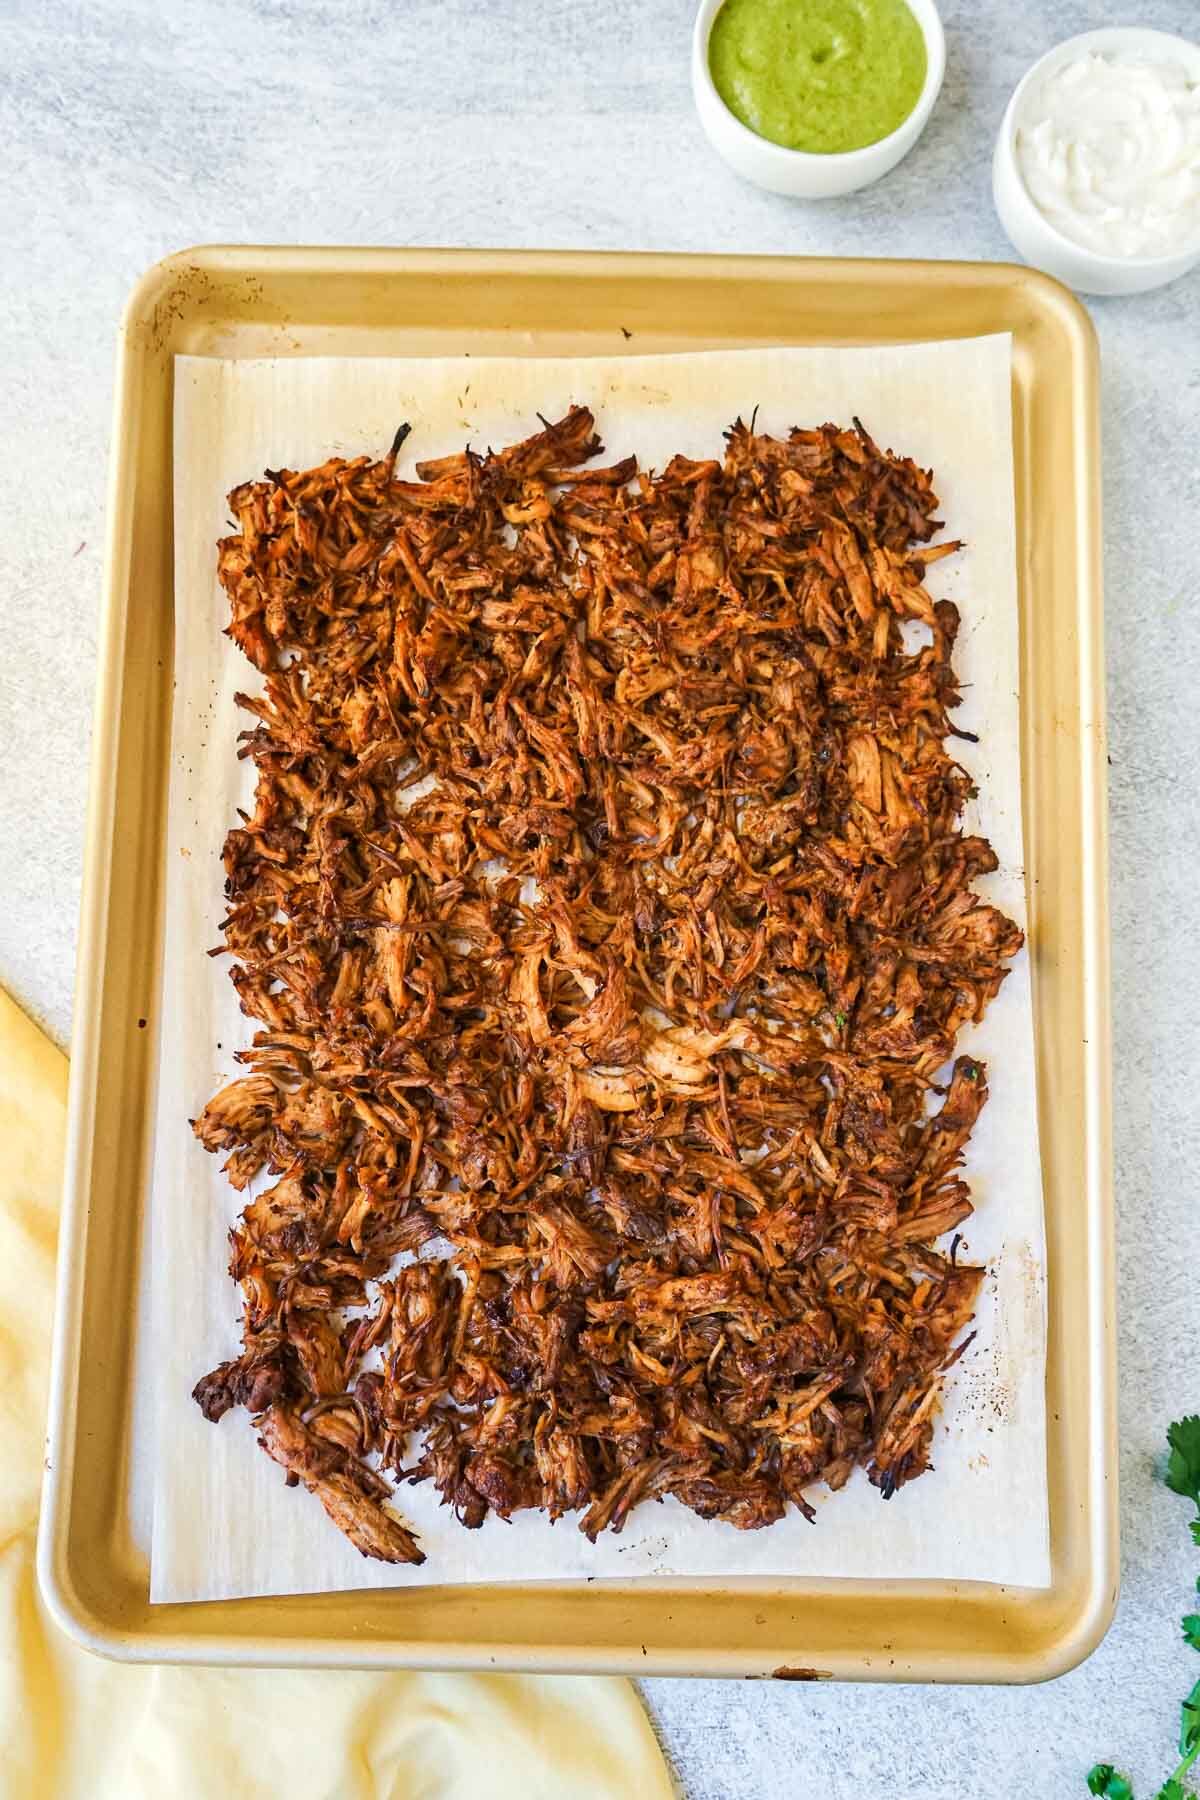 Crispy pork carnitas after being broiled in the oven.